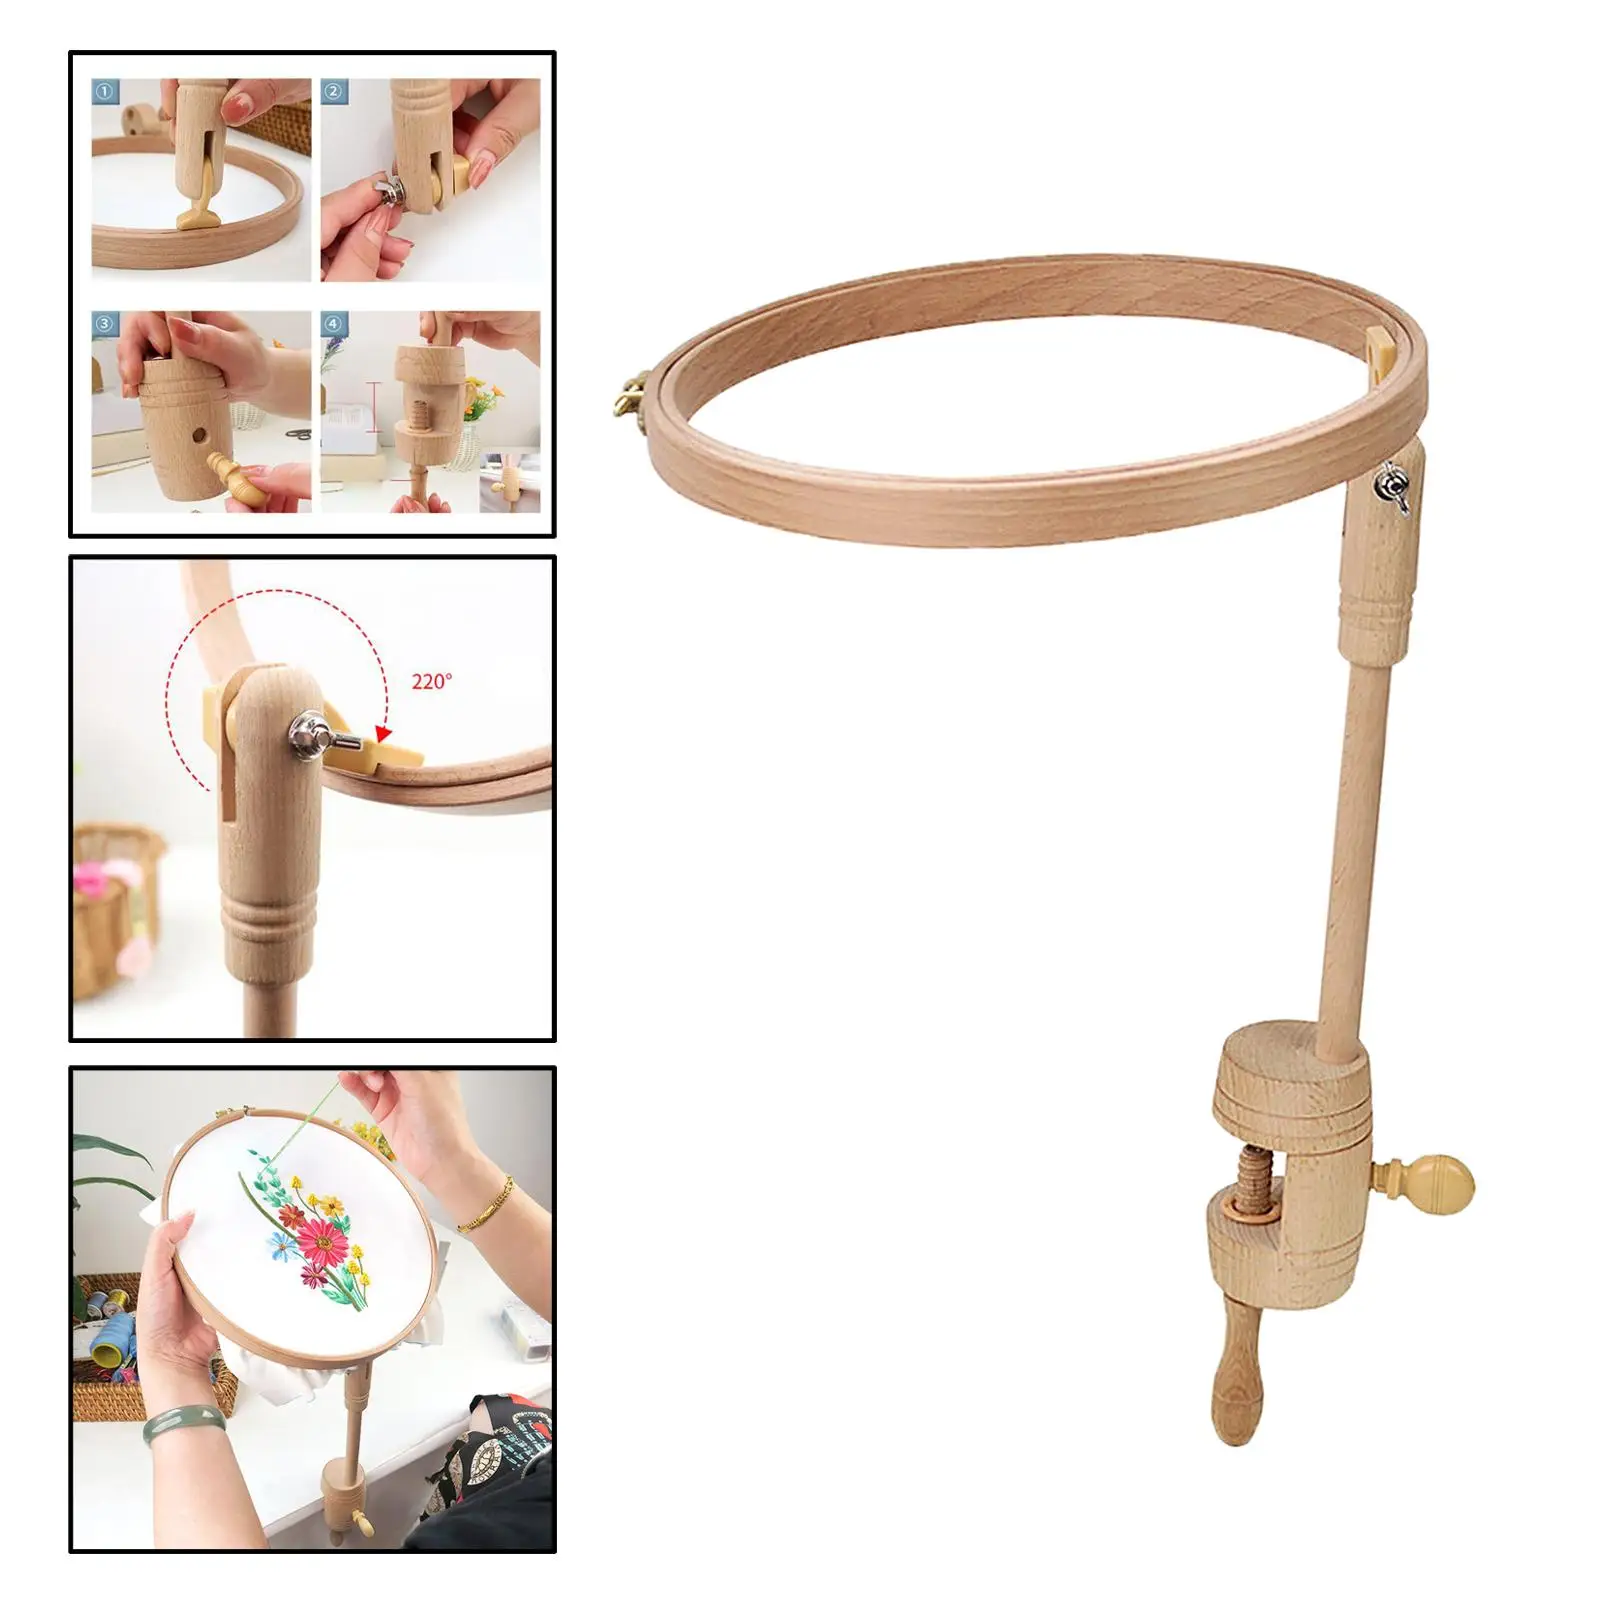 Embroidery Stand Desktop Embedded Adjustable Cross Stitch Lap Hoop Holder for dinning table